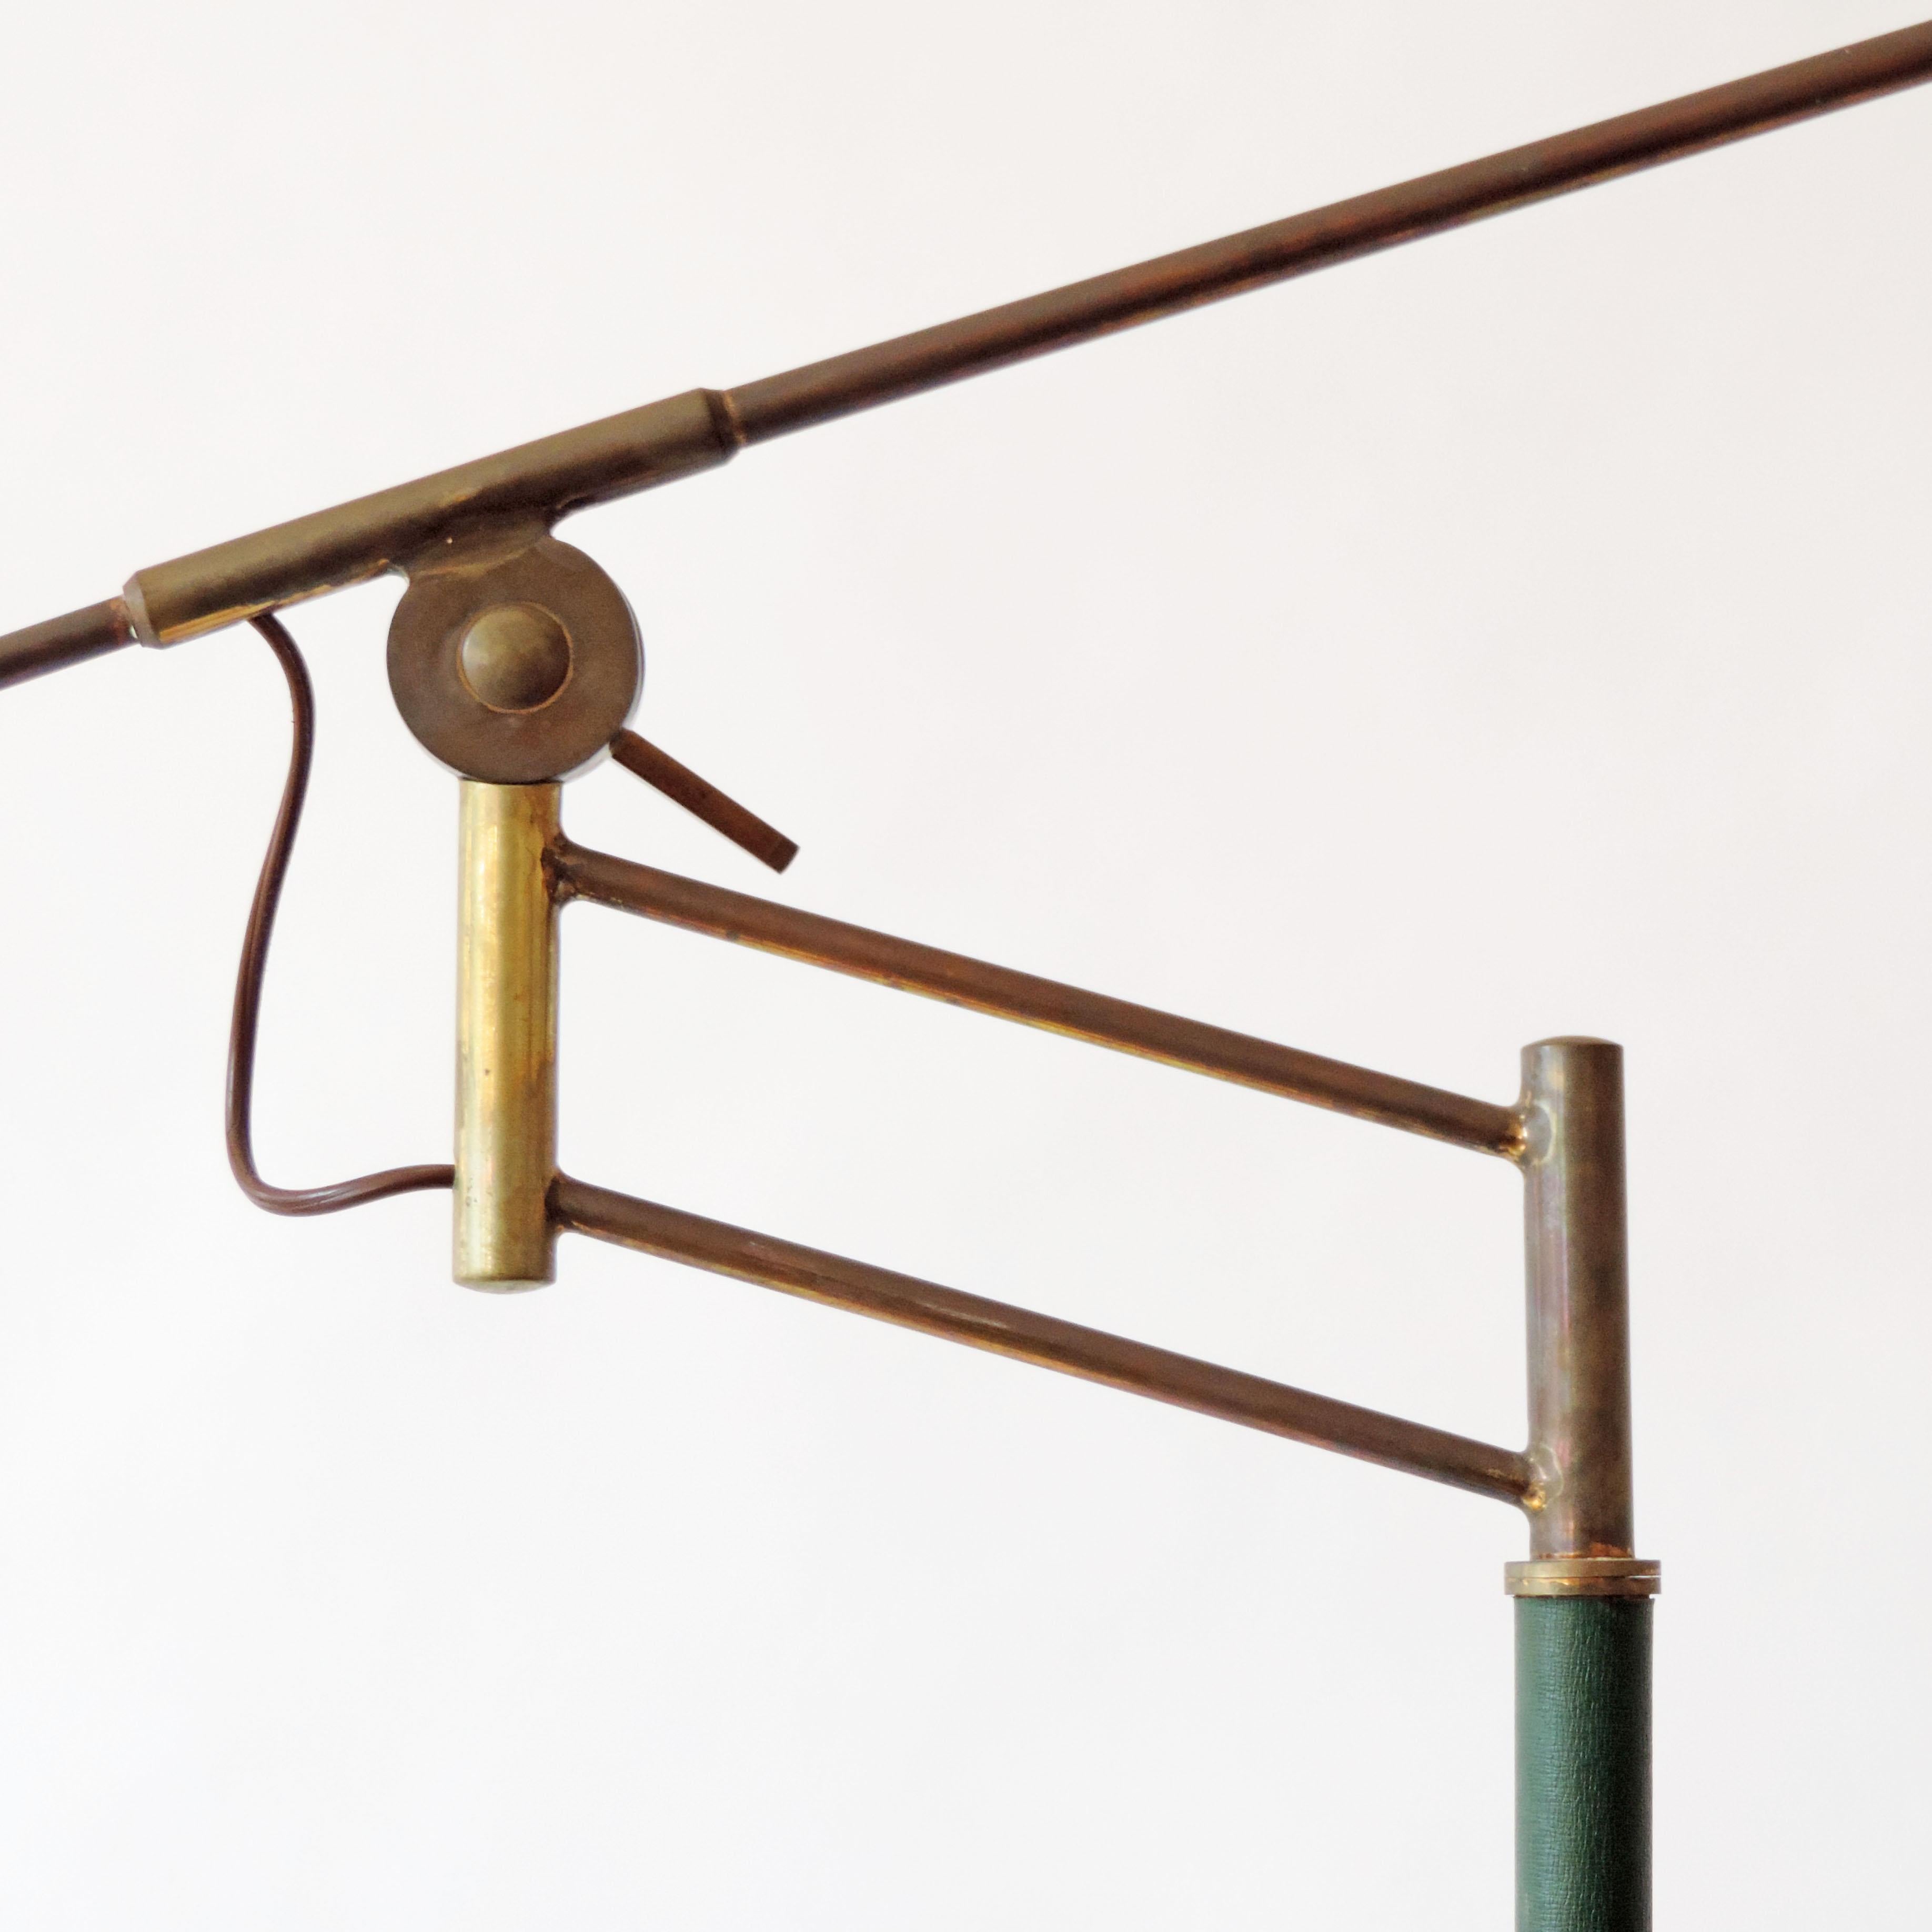 Rare Adjustable Italian Floor Lamp in Brass and Green Faux Leather, 1940s For Sale 1